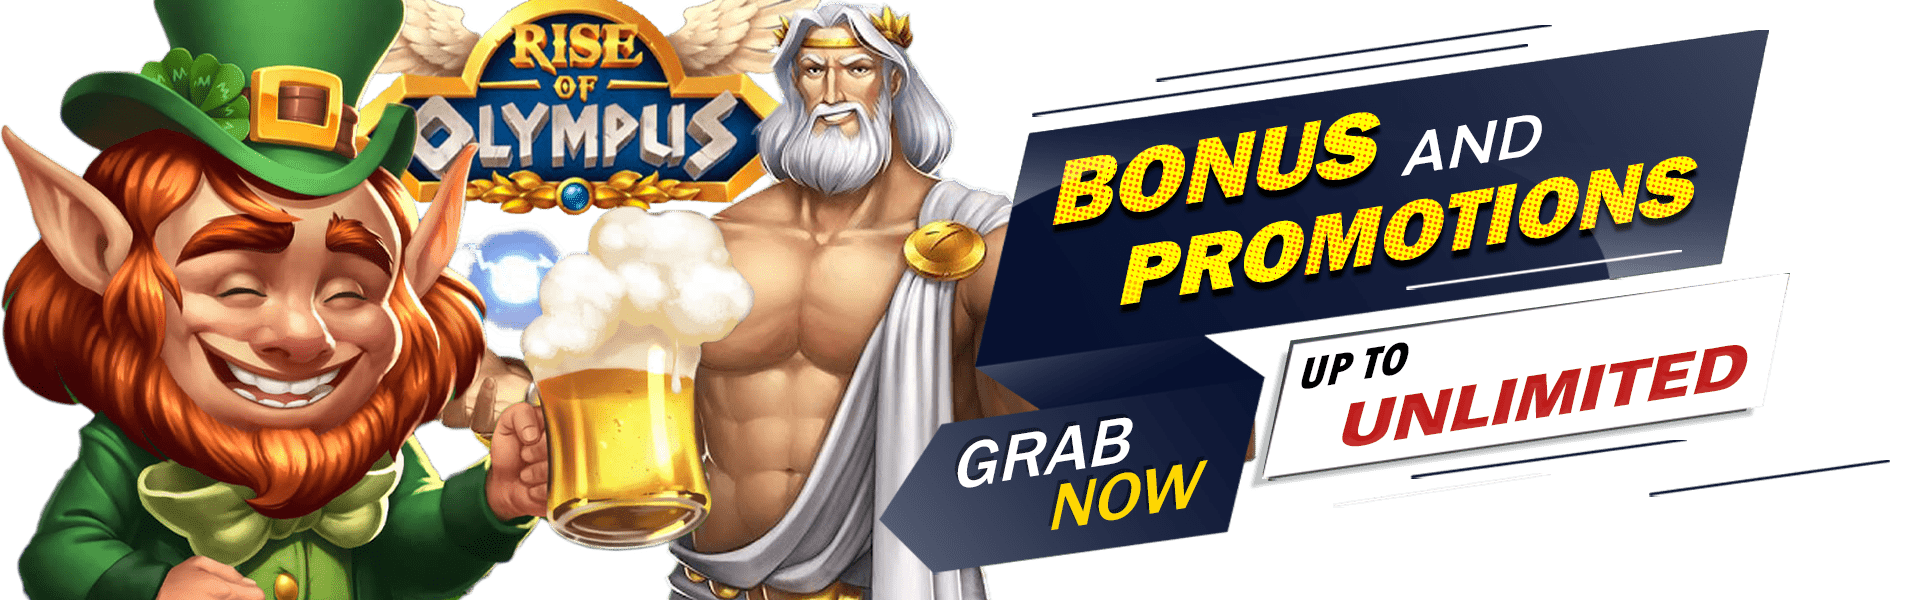 More Bonus and Promotions